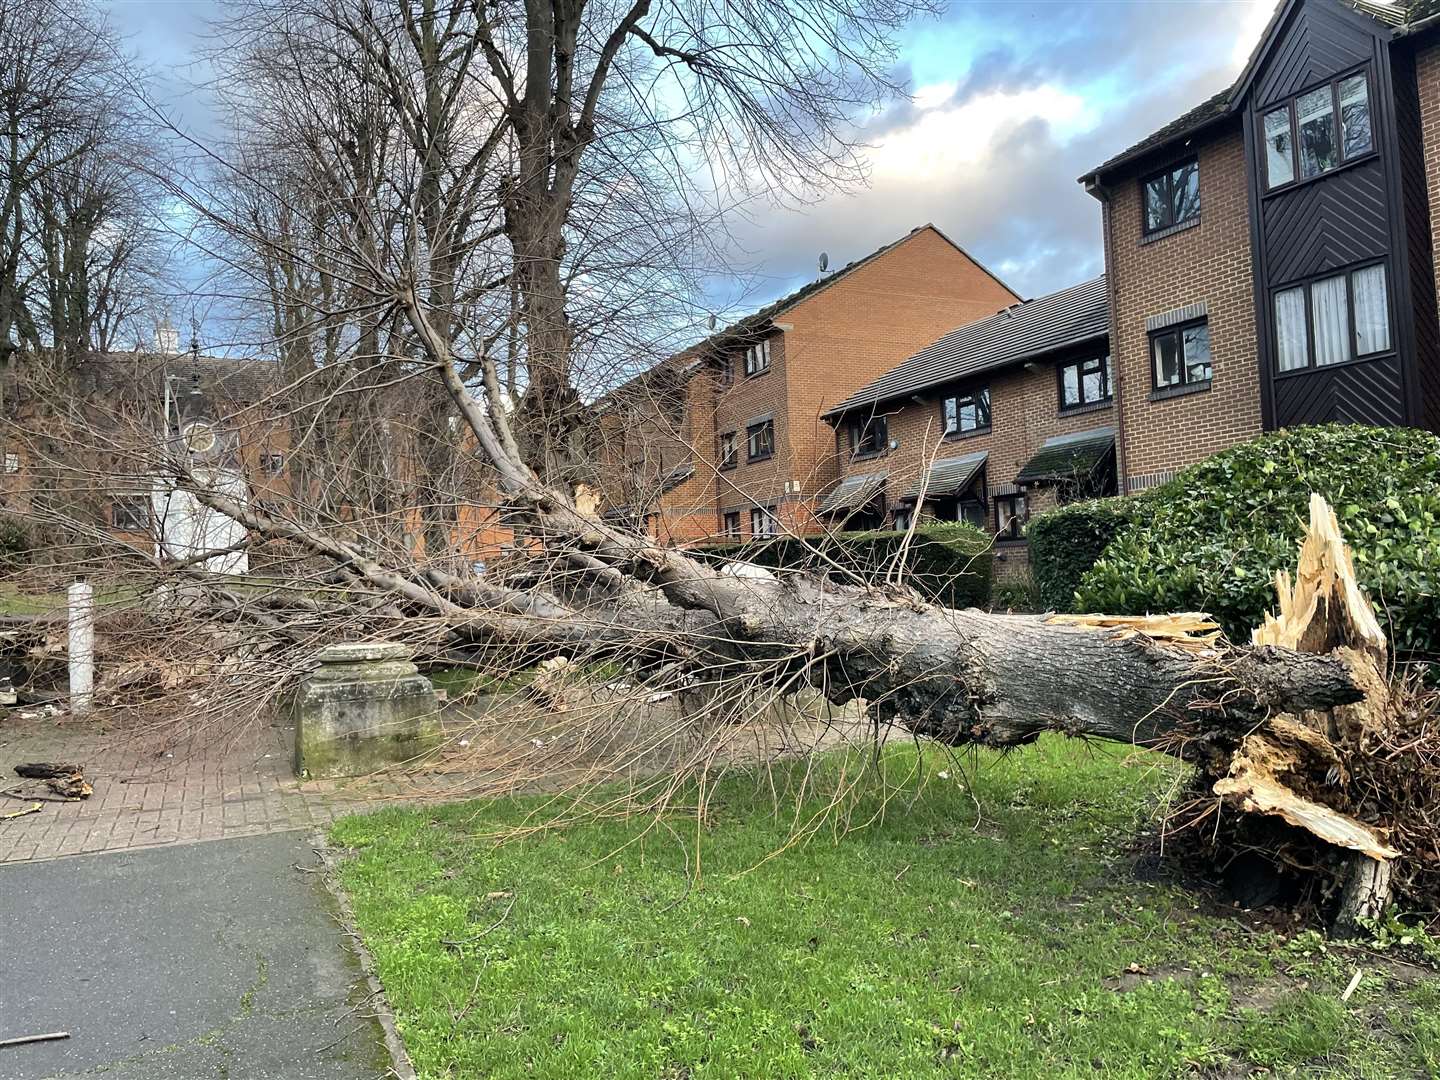 A tree blown over by the wind in Tooting, south-west London (Richard Wheeler/PA)